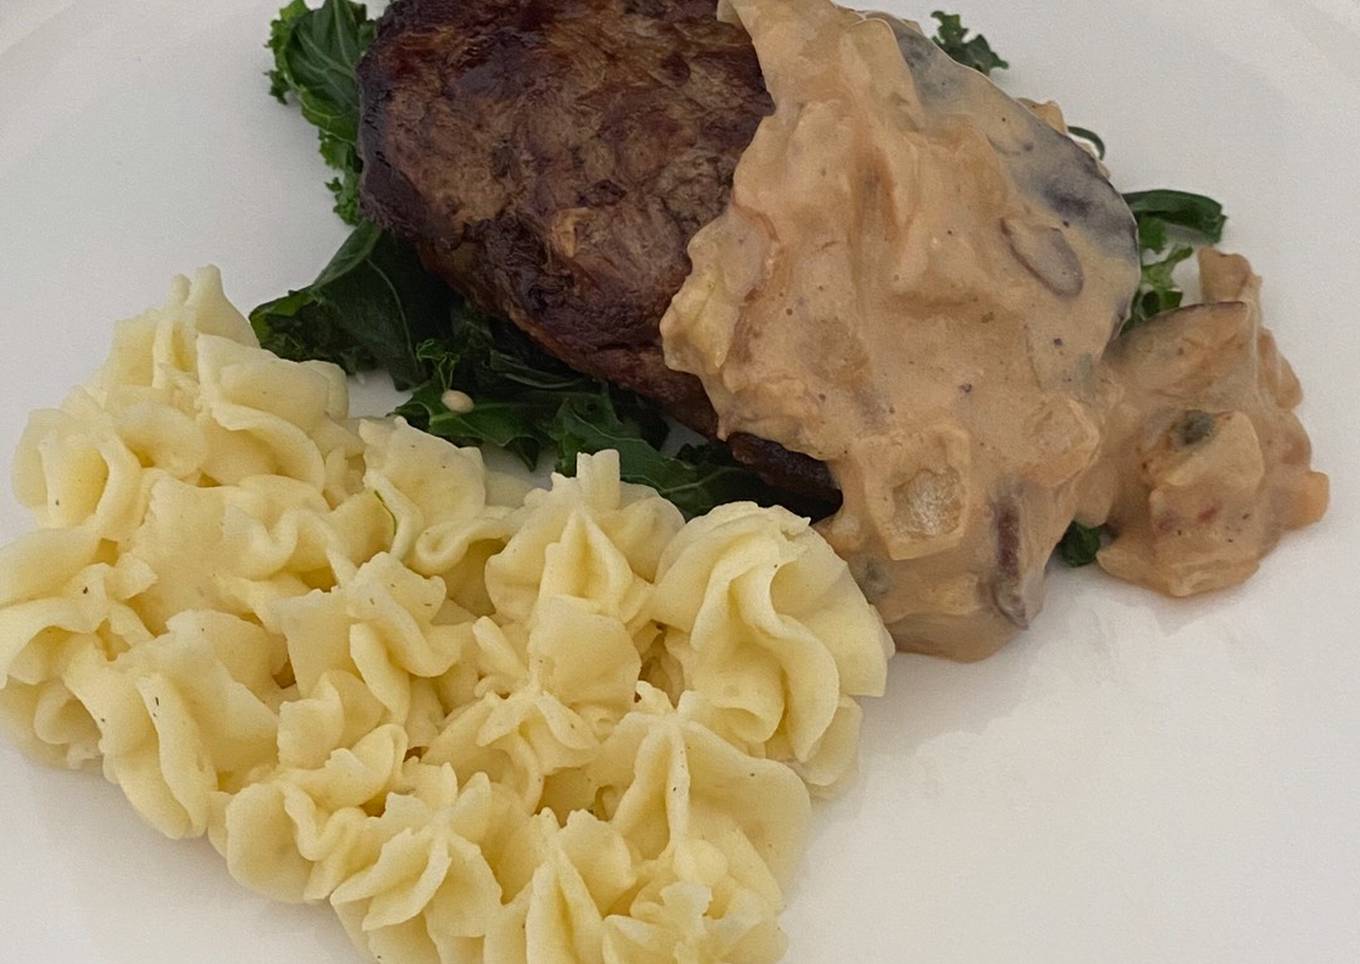 Filet Mignon With Creamy Mashed Potato And kale, Served With A Peppercorn Sauce